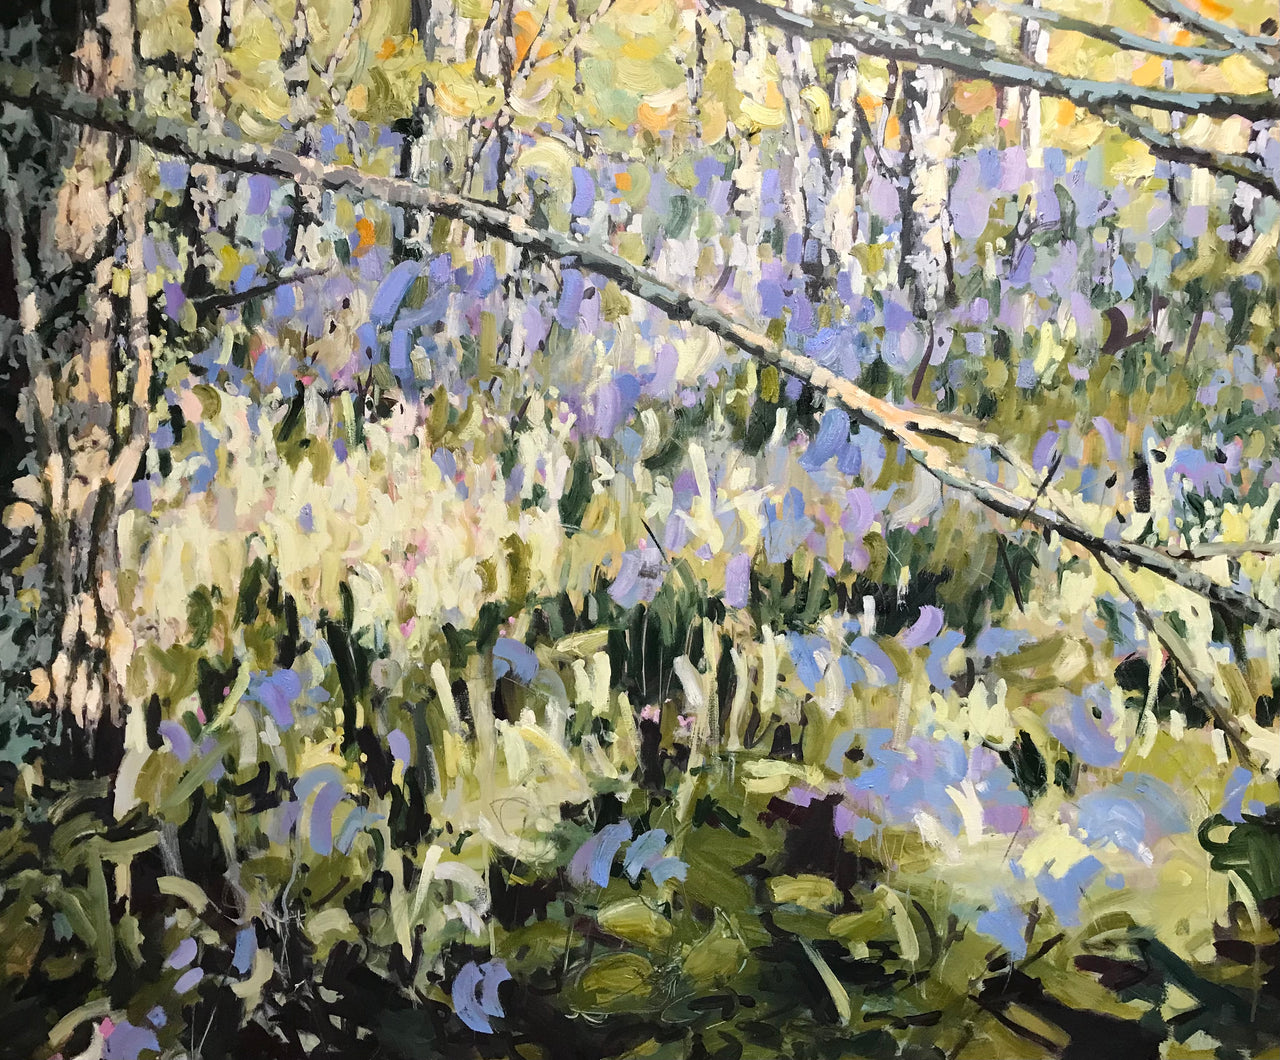 Oil painting by artist Jill Hudson of a woodland scene with bluebells and trees, with overhanging branches